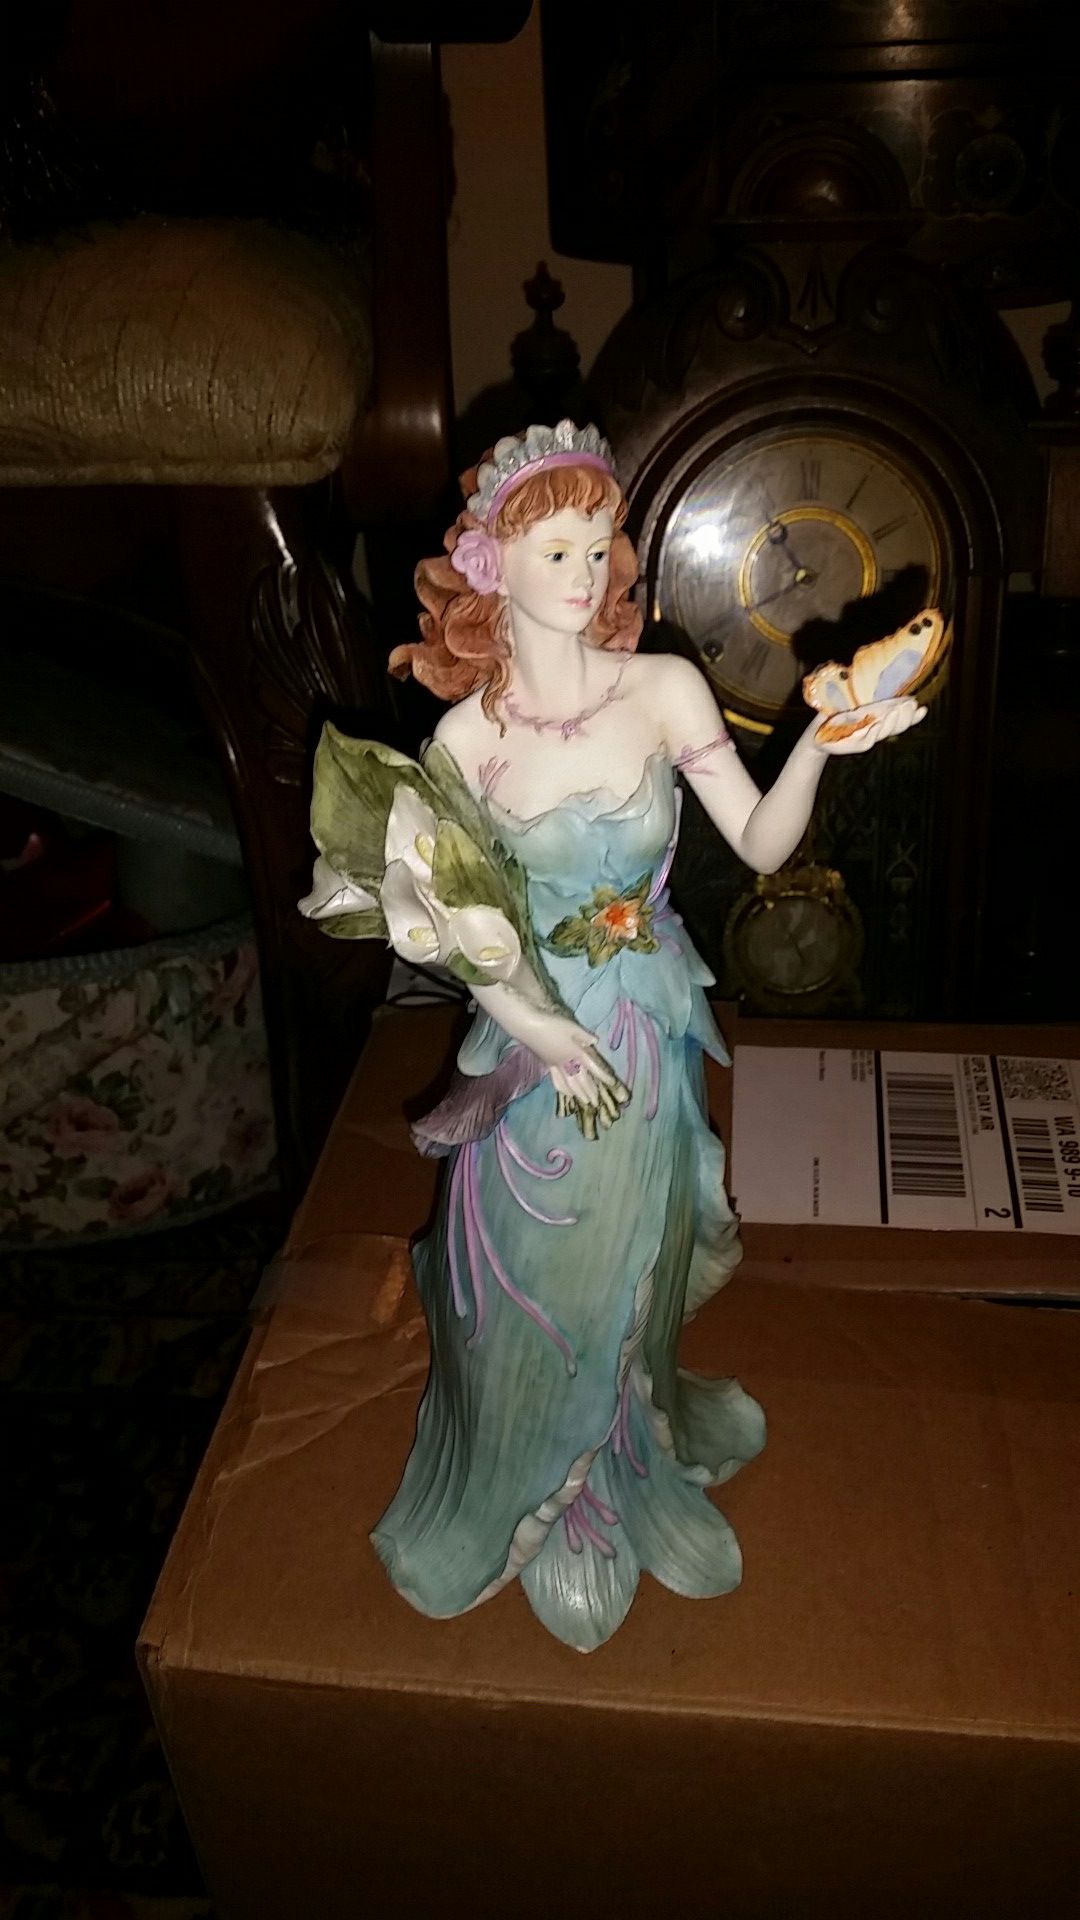 Selling a vanmark "wilhelmina" statue from the enchanted garden collection